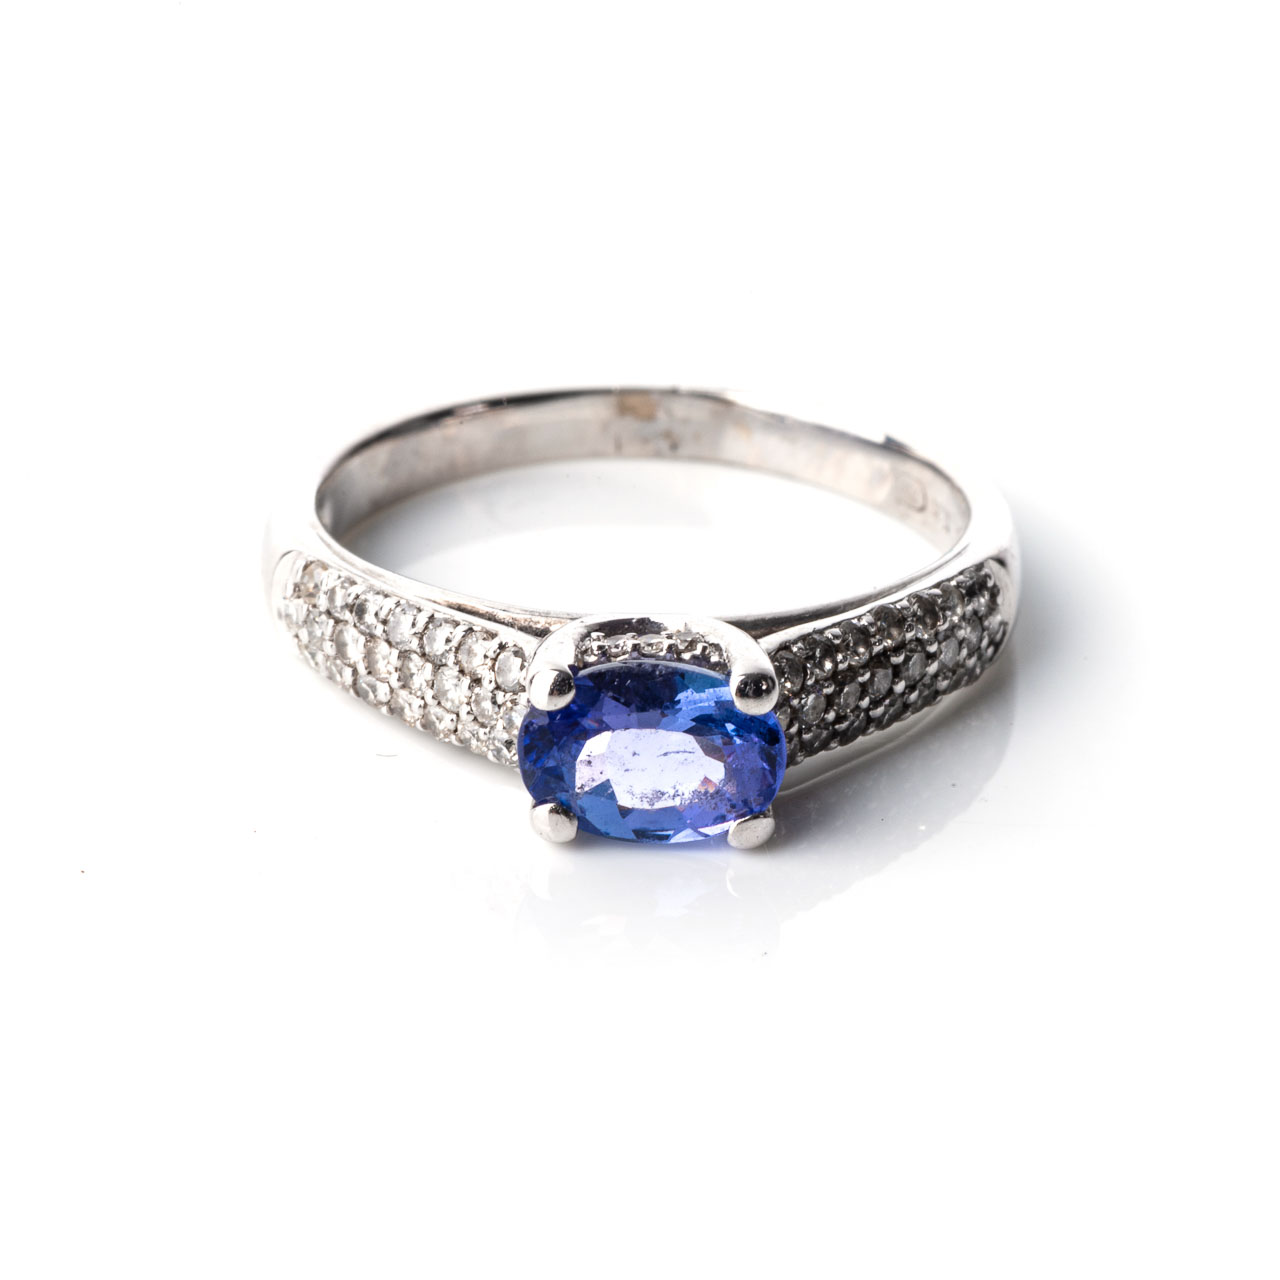 A TANZANITE AND DIAMOND RING Claw-set to the centre, with an oval-cut tanzanite weighing